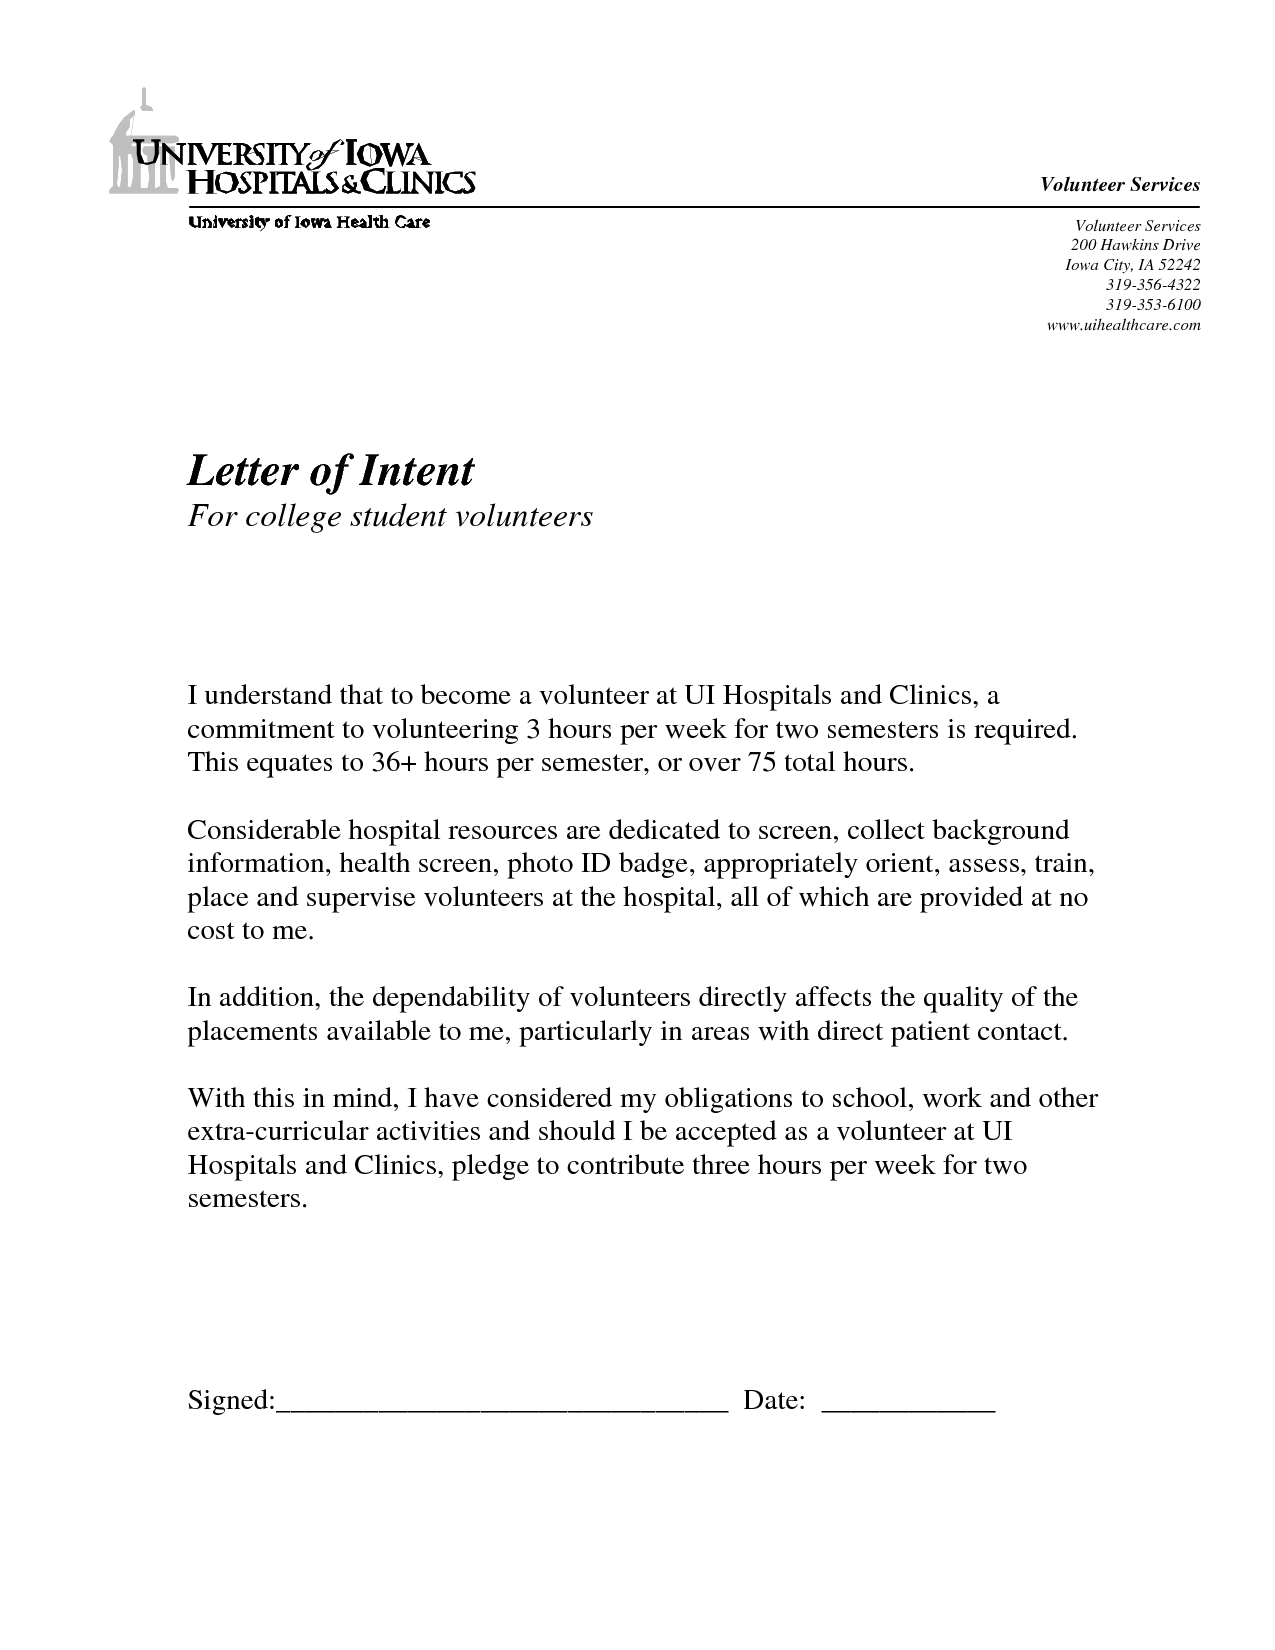 Homeschool Letter Of Intent Template Samples Letter Template Collection